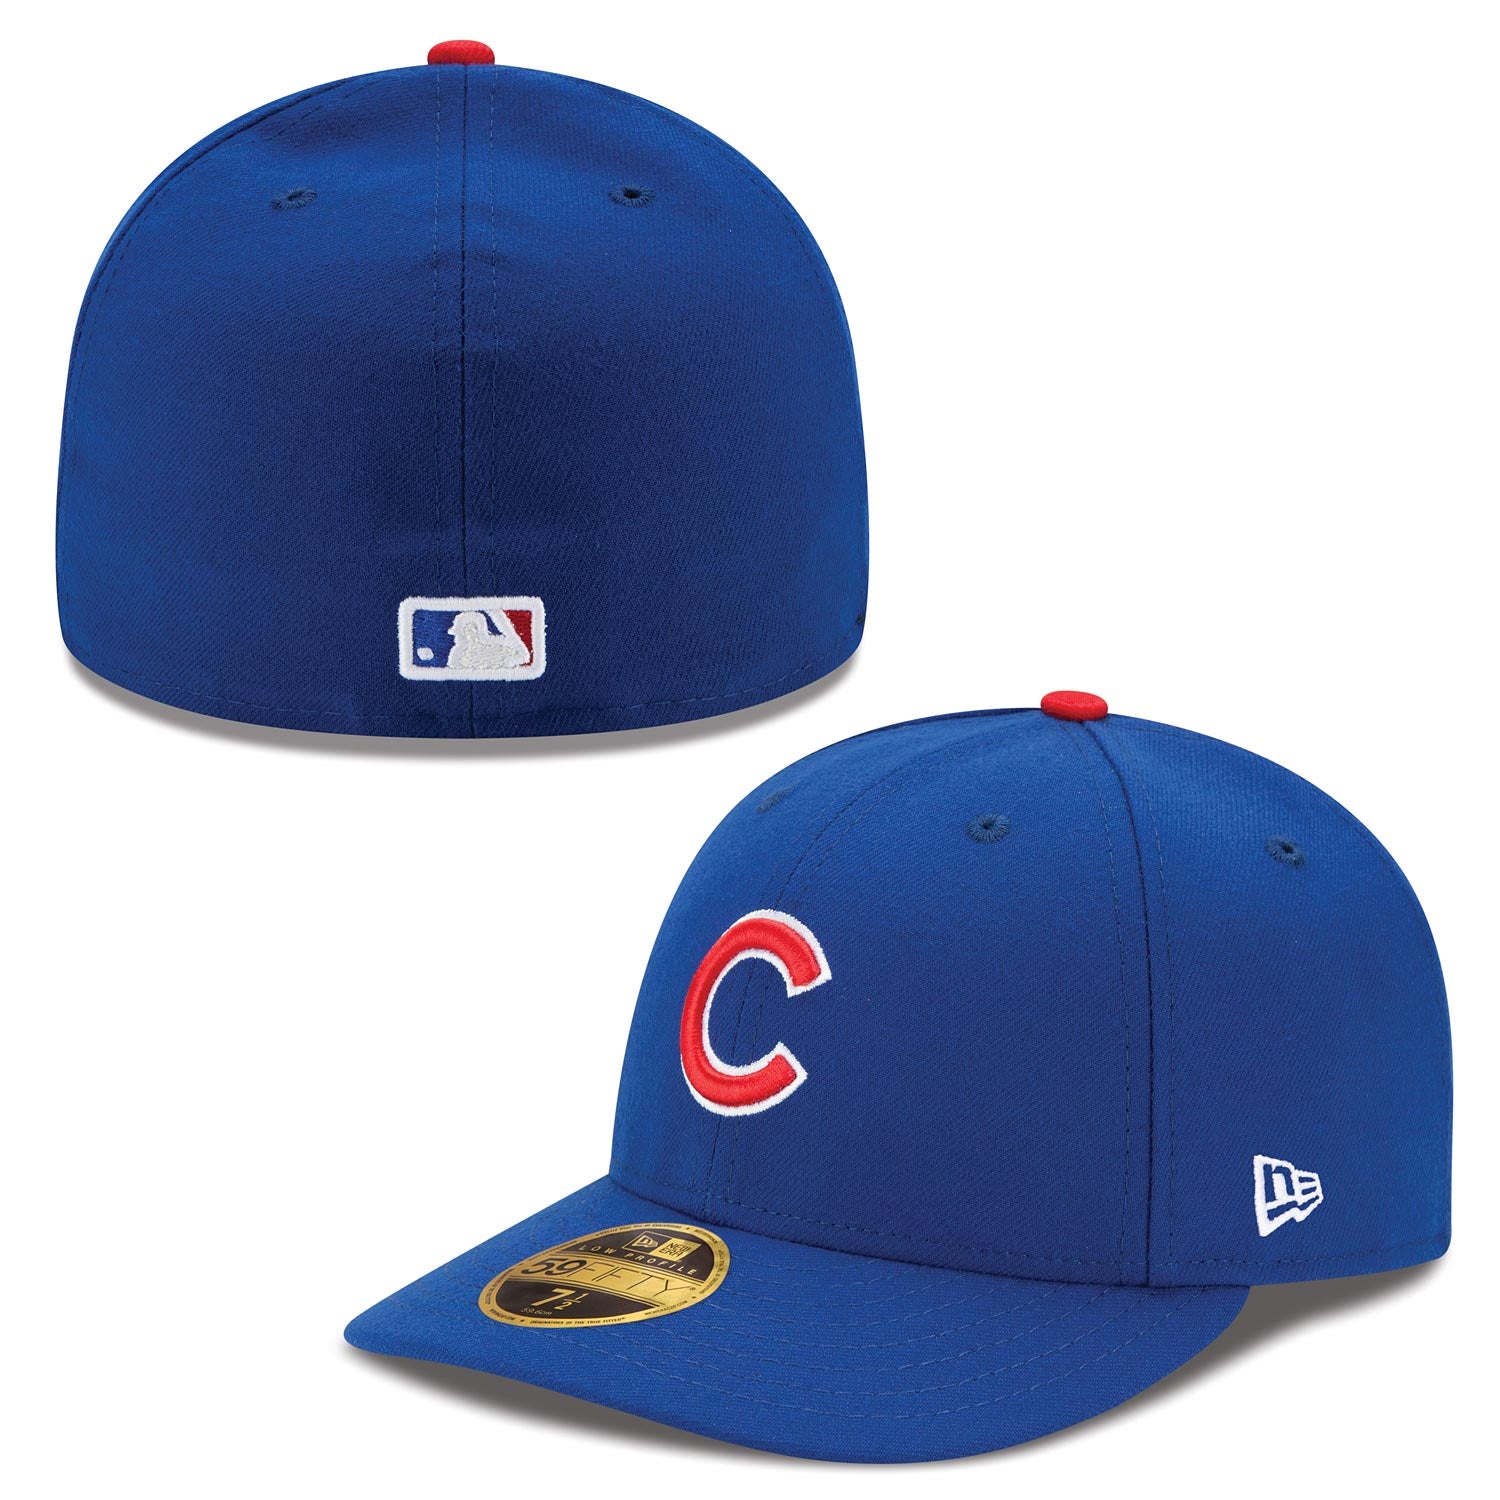 Official Low Crown 59Fifty Hats, New Era Low Crown Caps, Low Crown 59Fifty  Hats